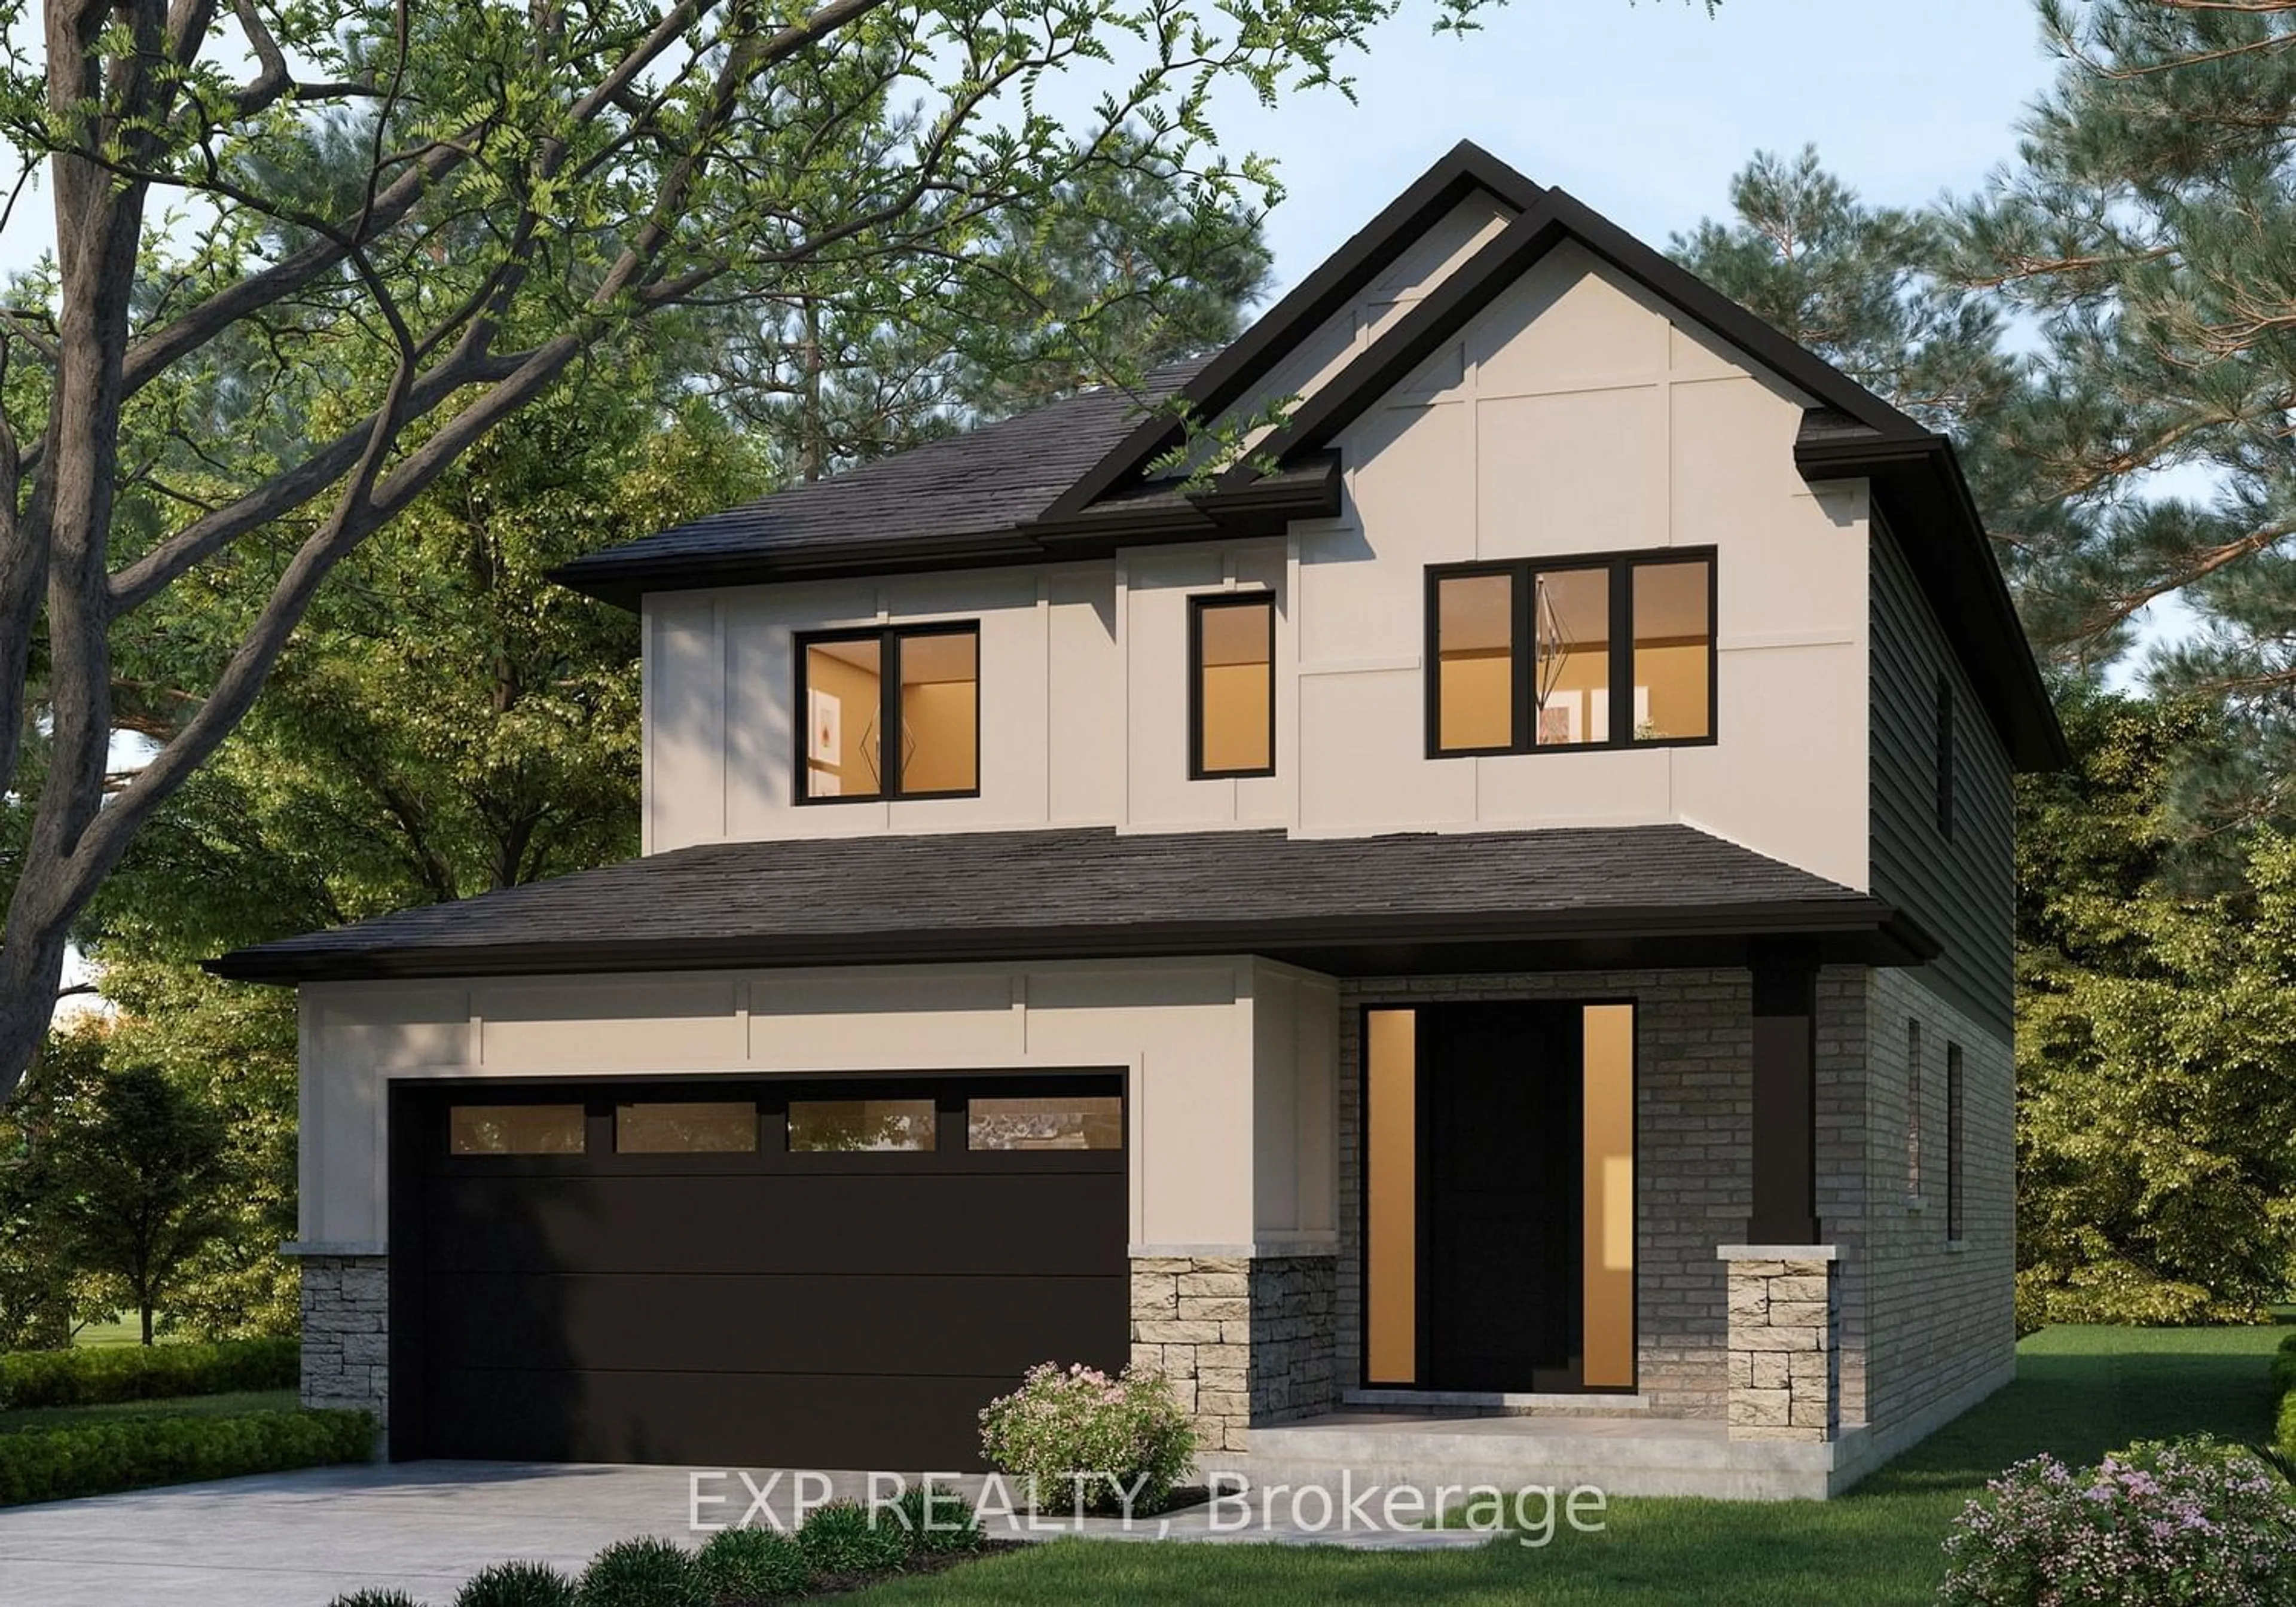 Home with brick exterior material for 3164 Regiment Rd, London Ontario N6P 0H2